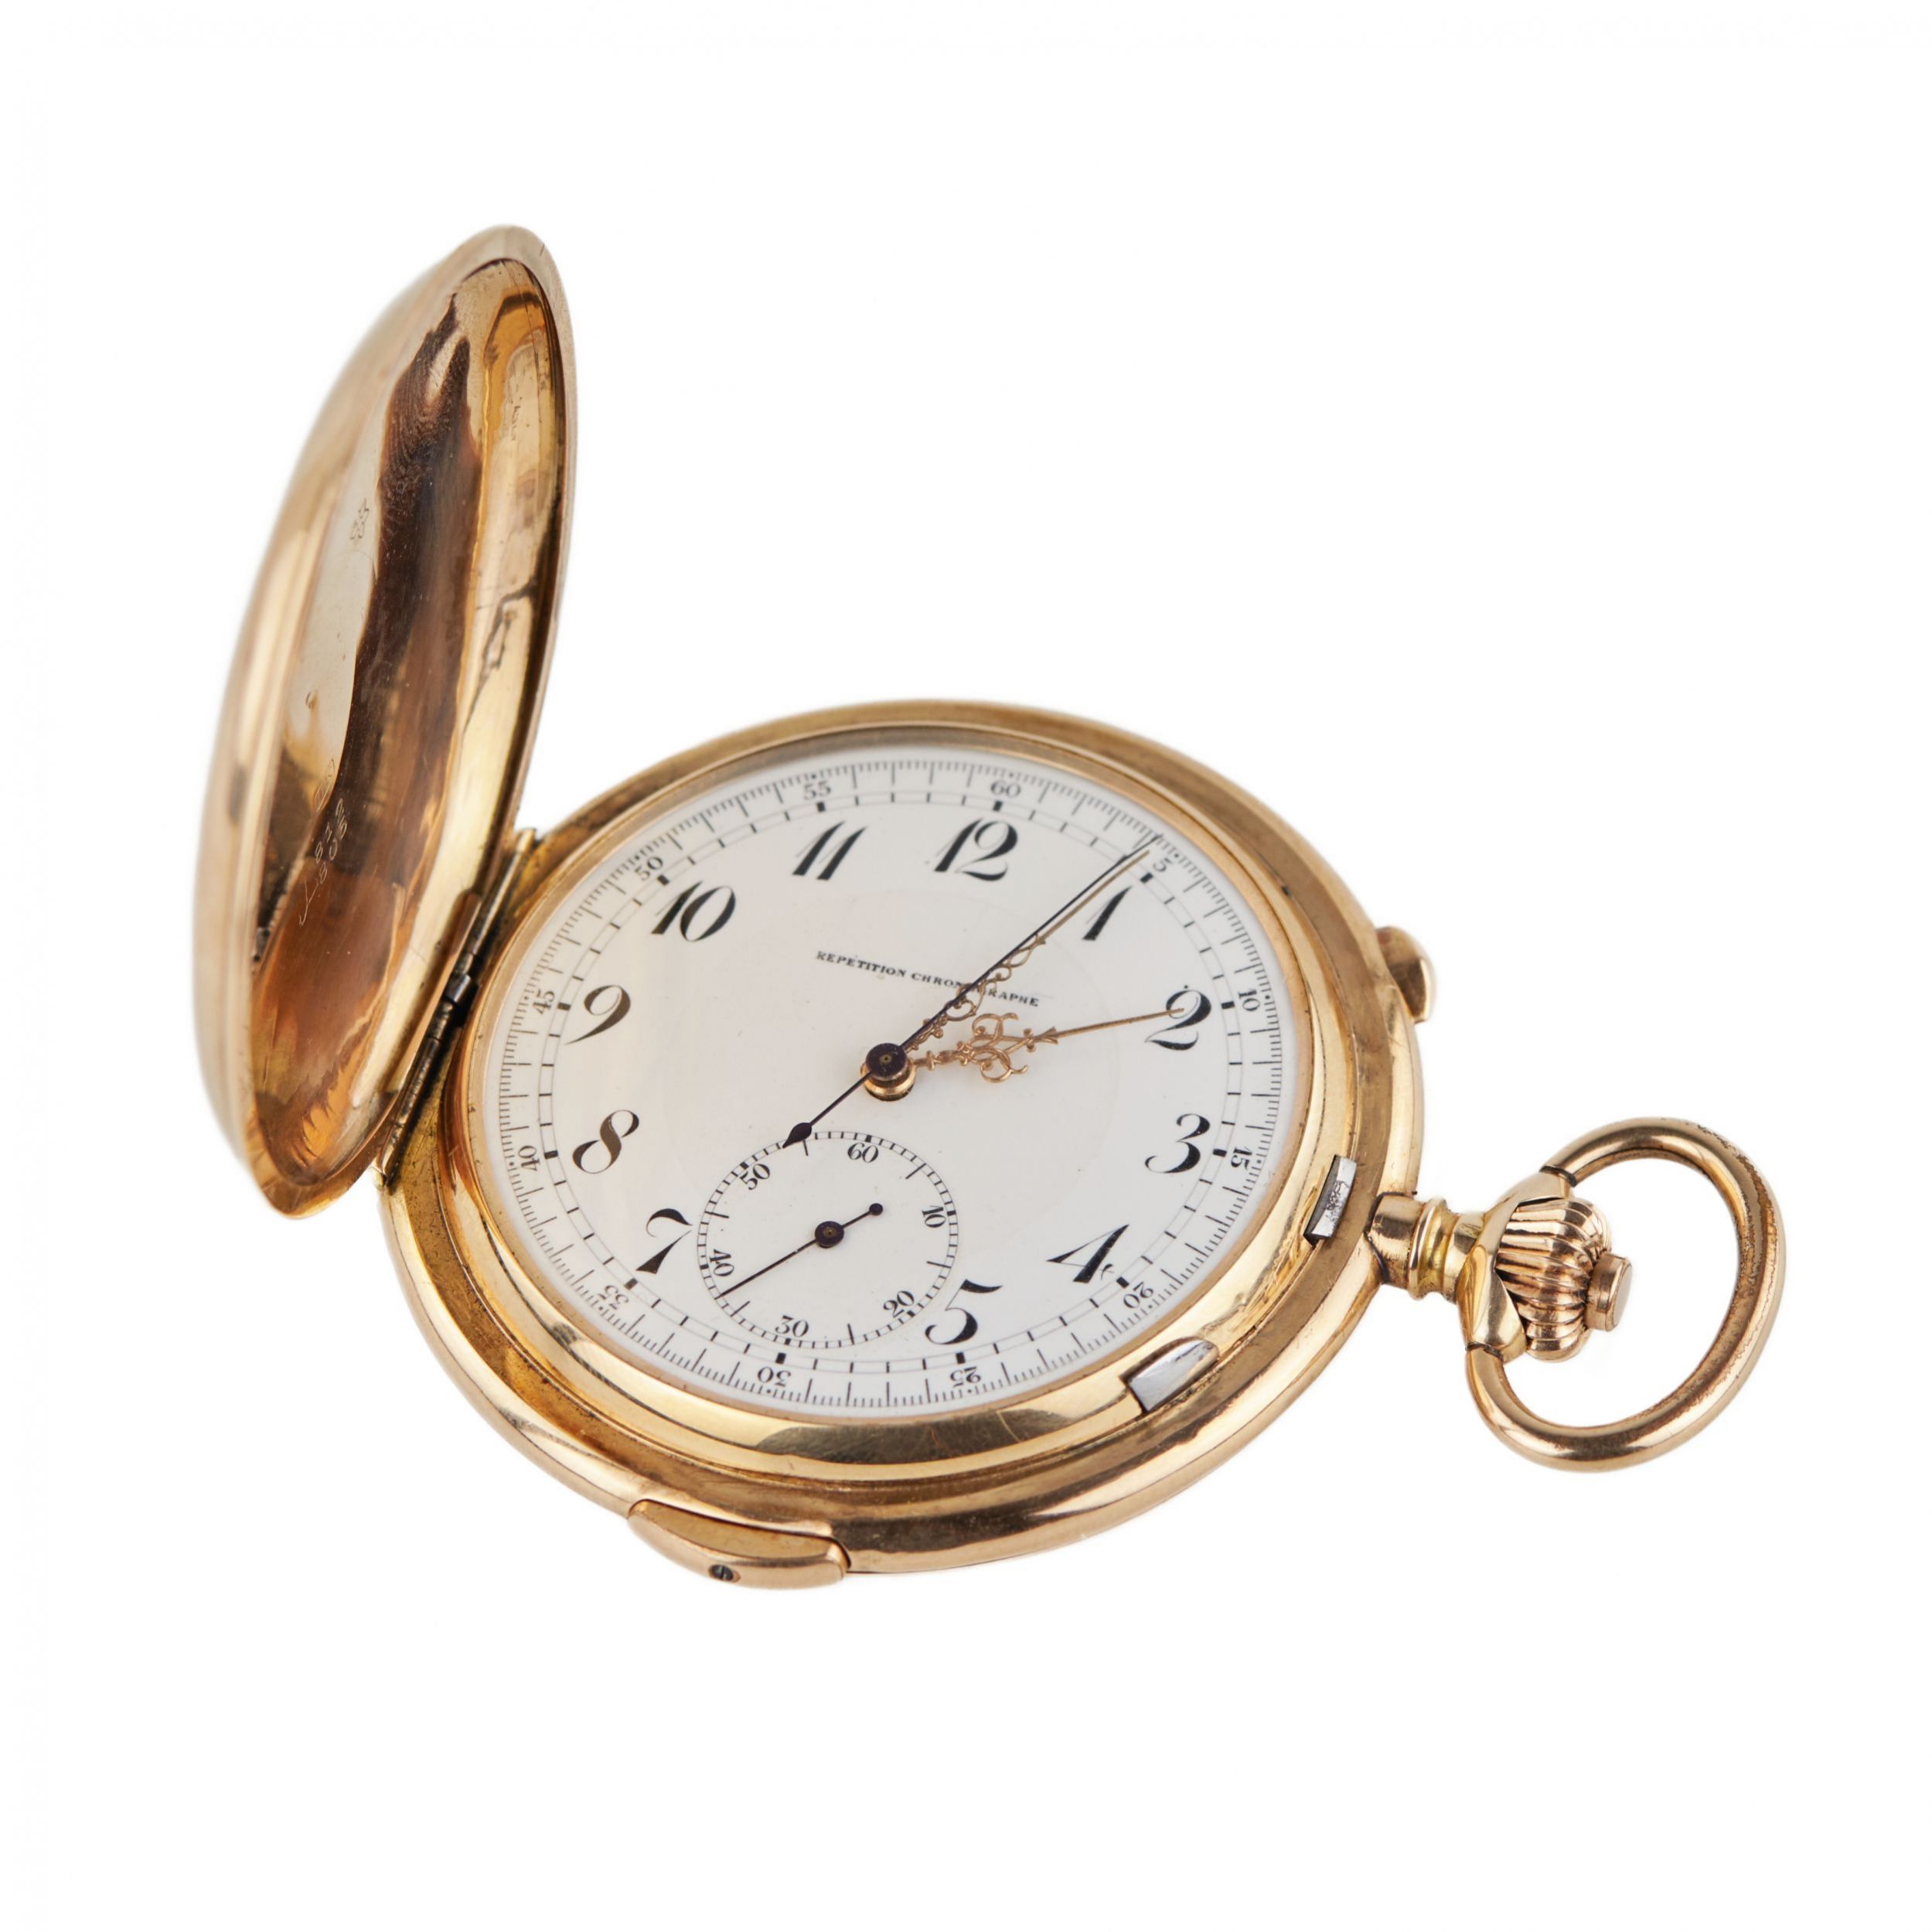 Heures Repetition Quarts Taschenuhr Chronographe 14k Gold Pocket Watch - Image 11 of 11